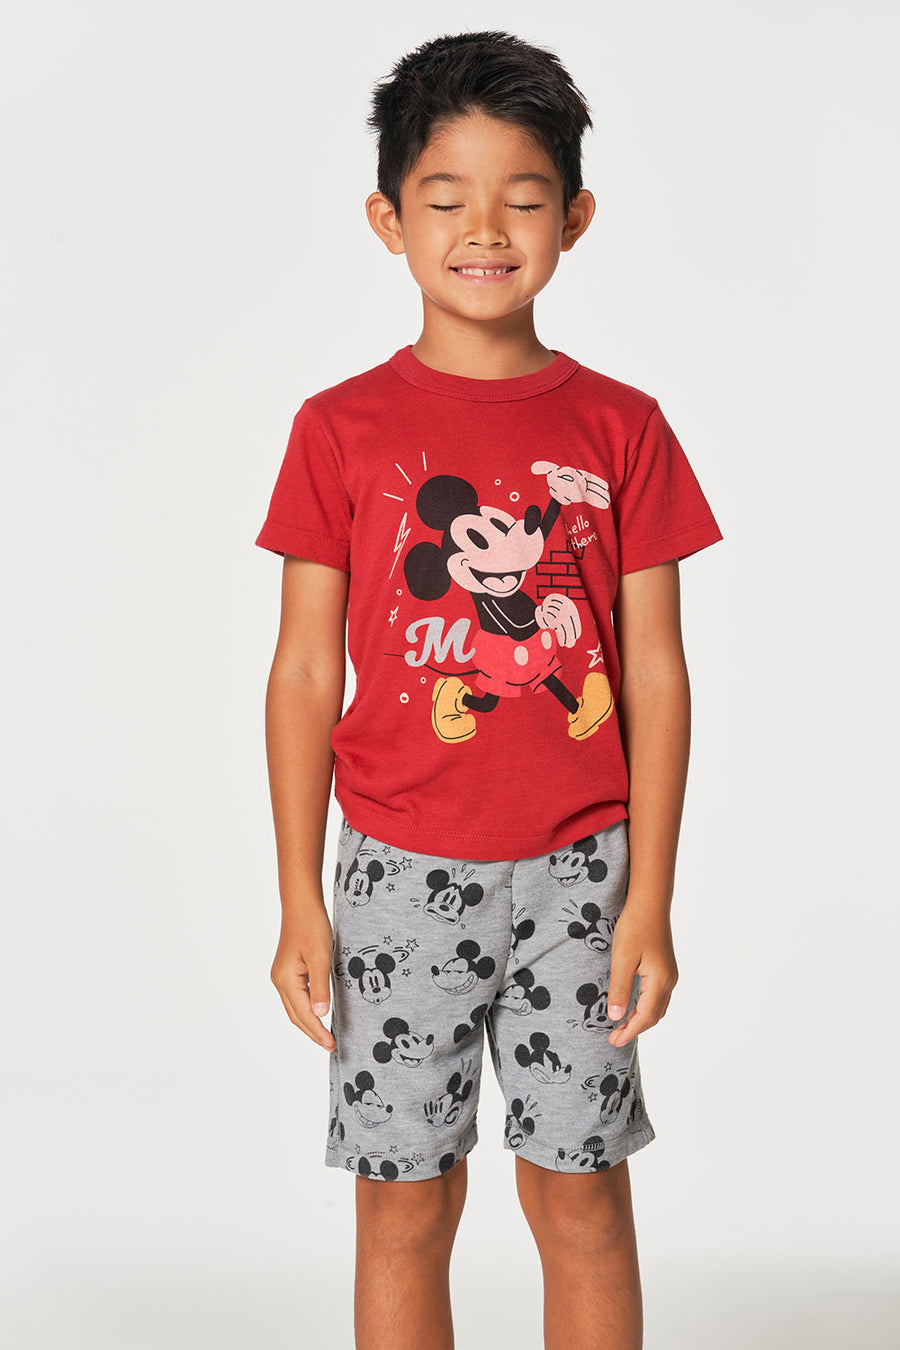 Disney Mickey Mouse - Mickey BOYS chaserbrand